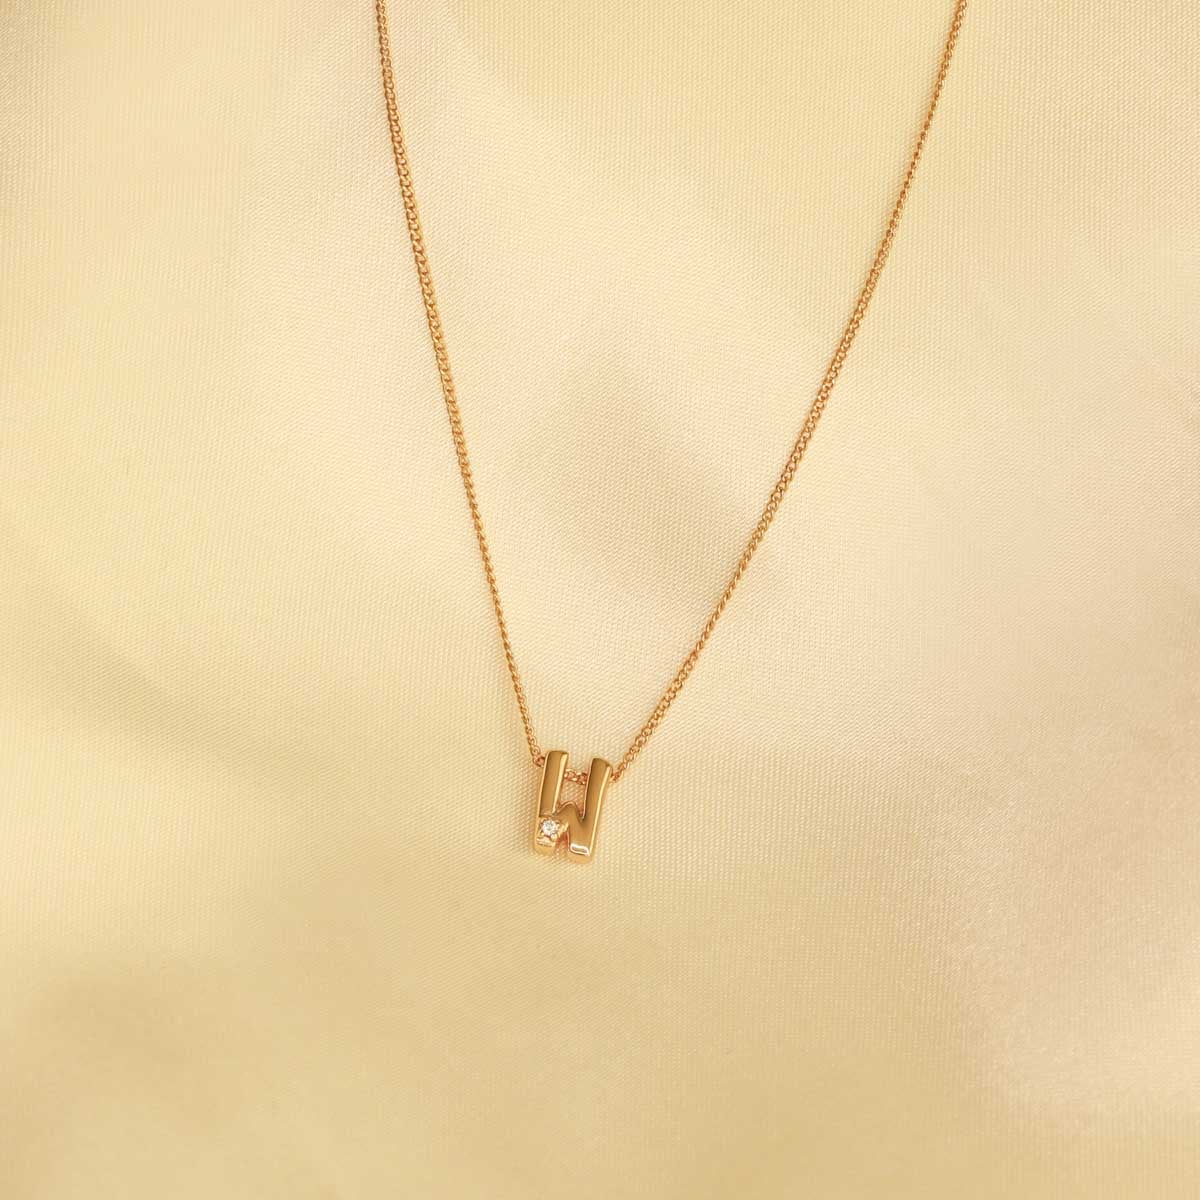 Flat lay shot of W Initial Pendant Necklace in Gold